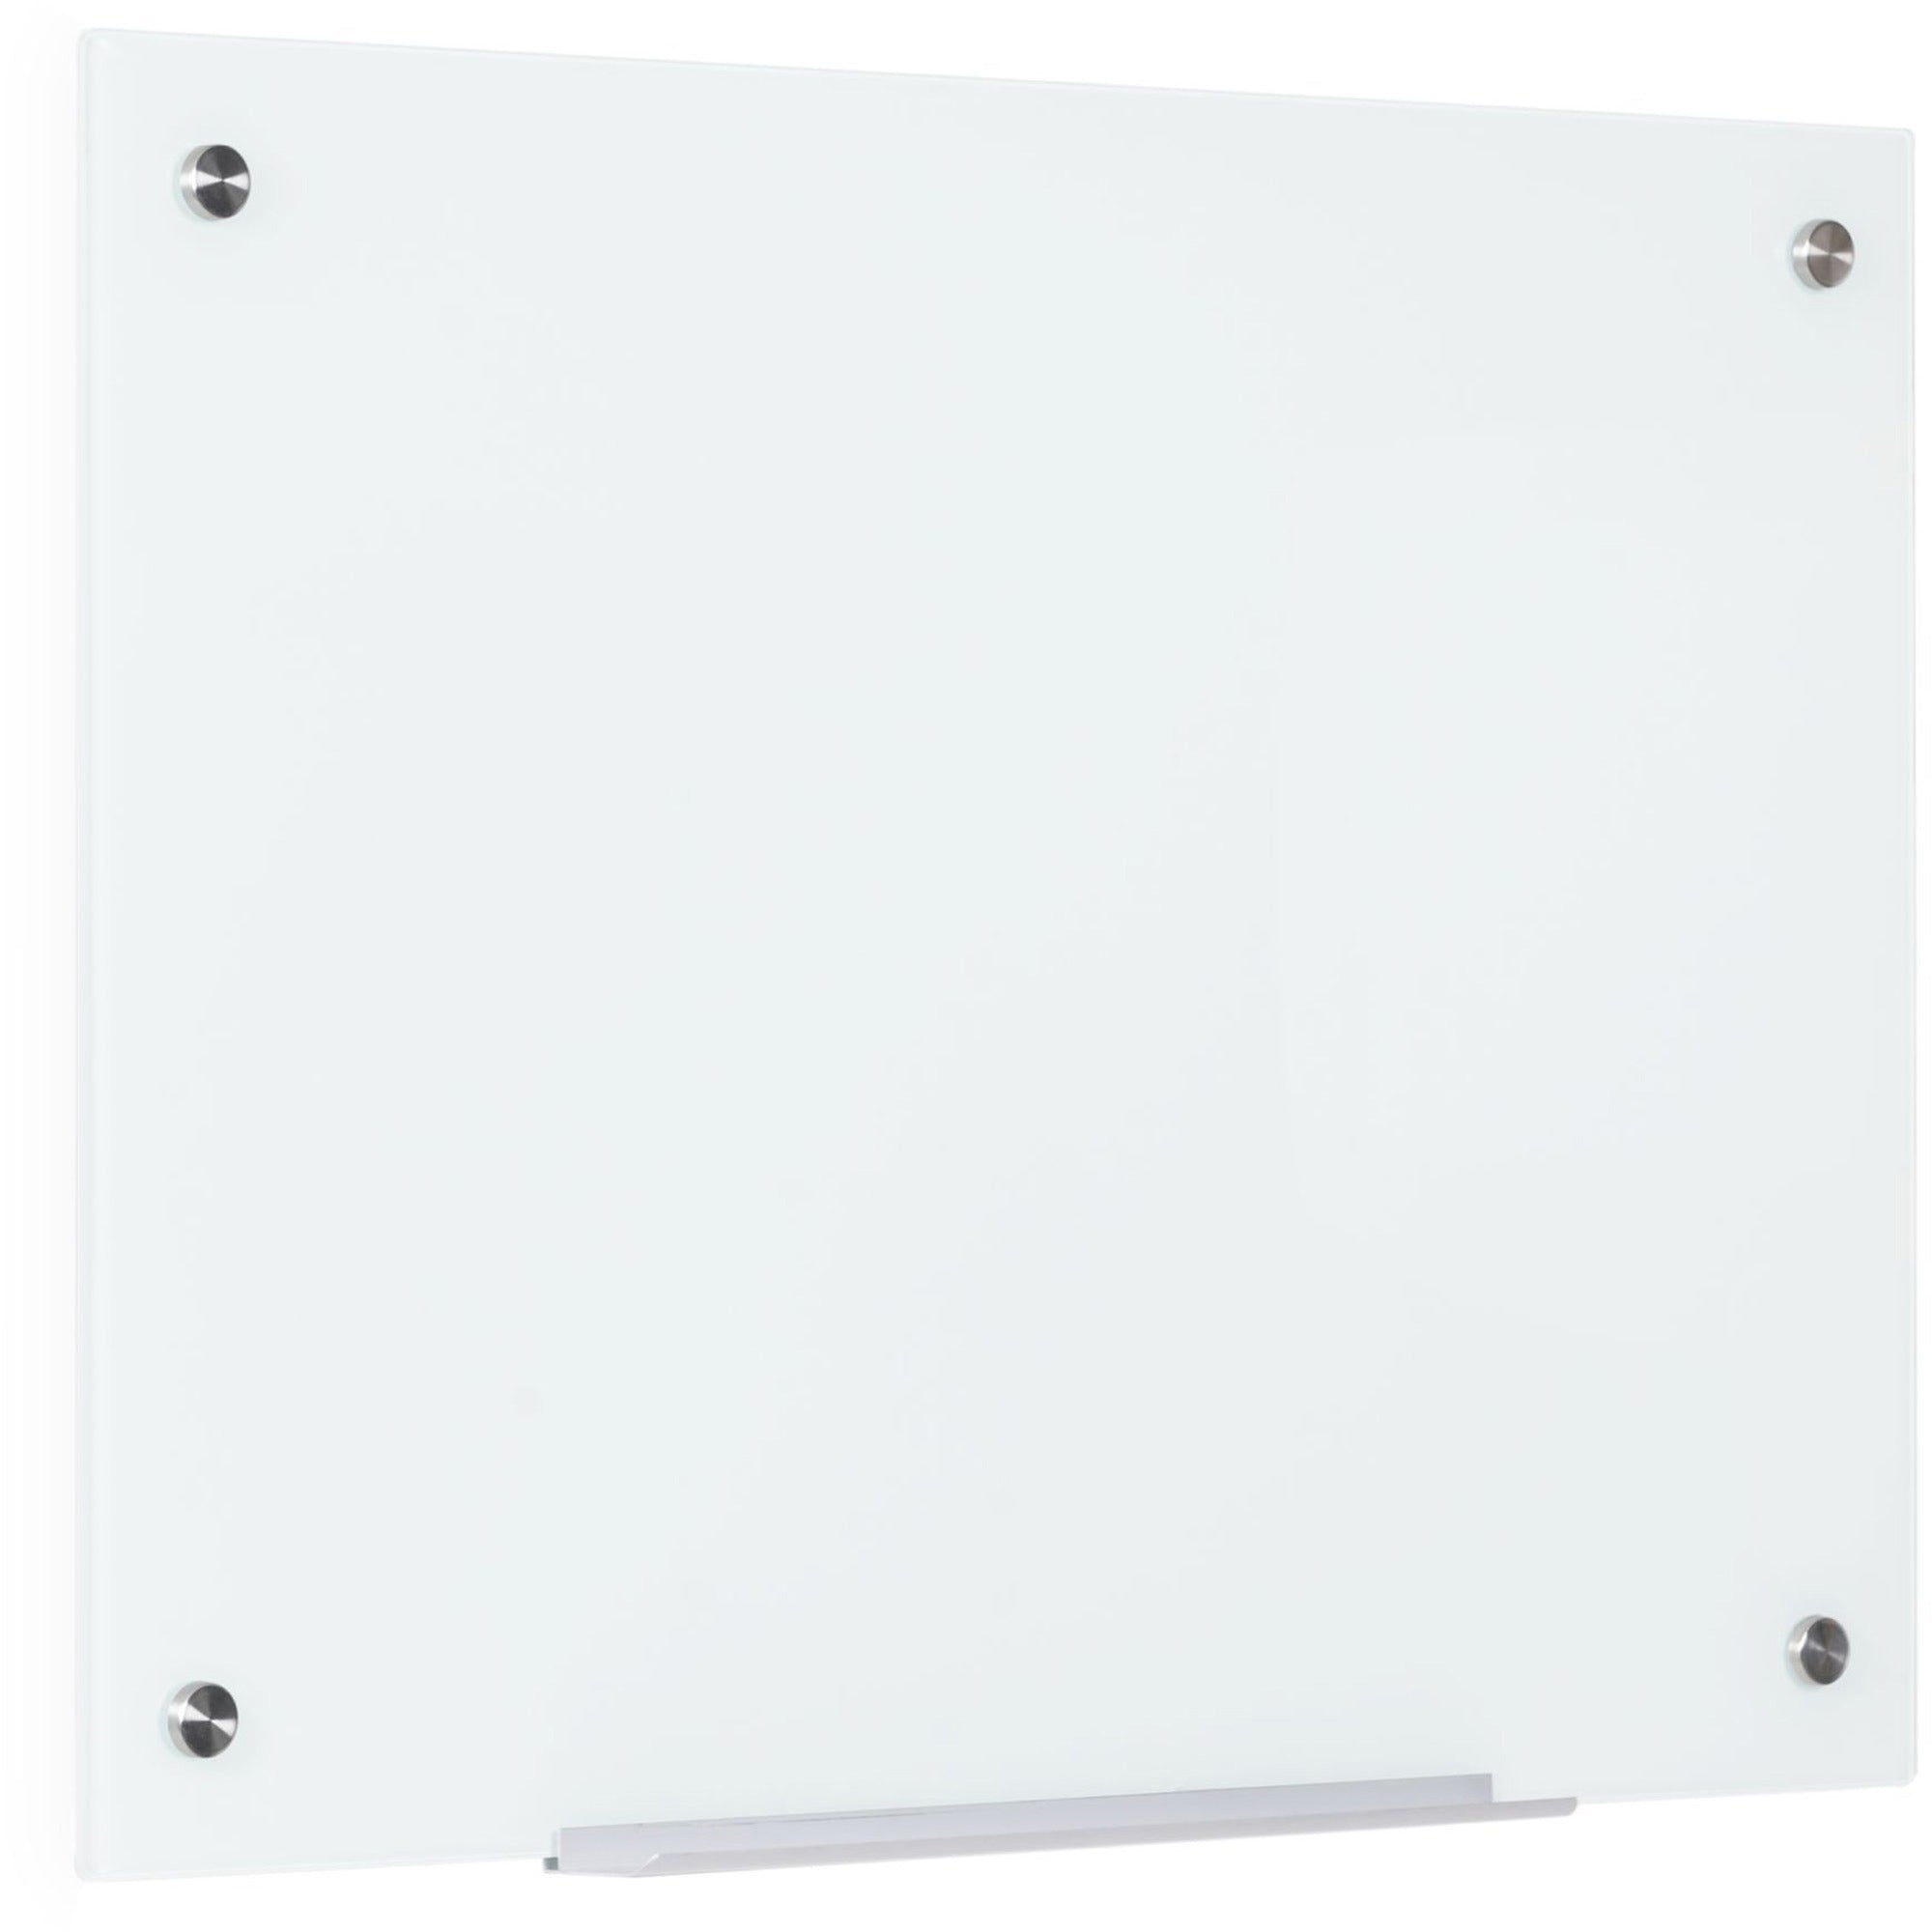 bi-silque-magnetic-glass-dry-erase-board-36-3-ft-width-x-48-4-ft-height-white-glass-surface-rectangle-horizontal-vertical-magnetic-1-each_bvcgl080107 - 4